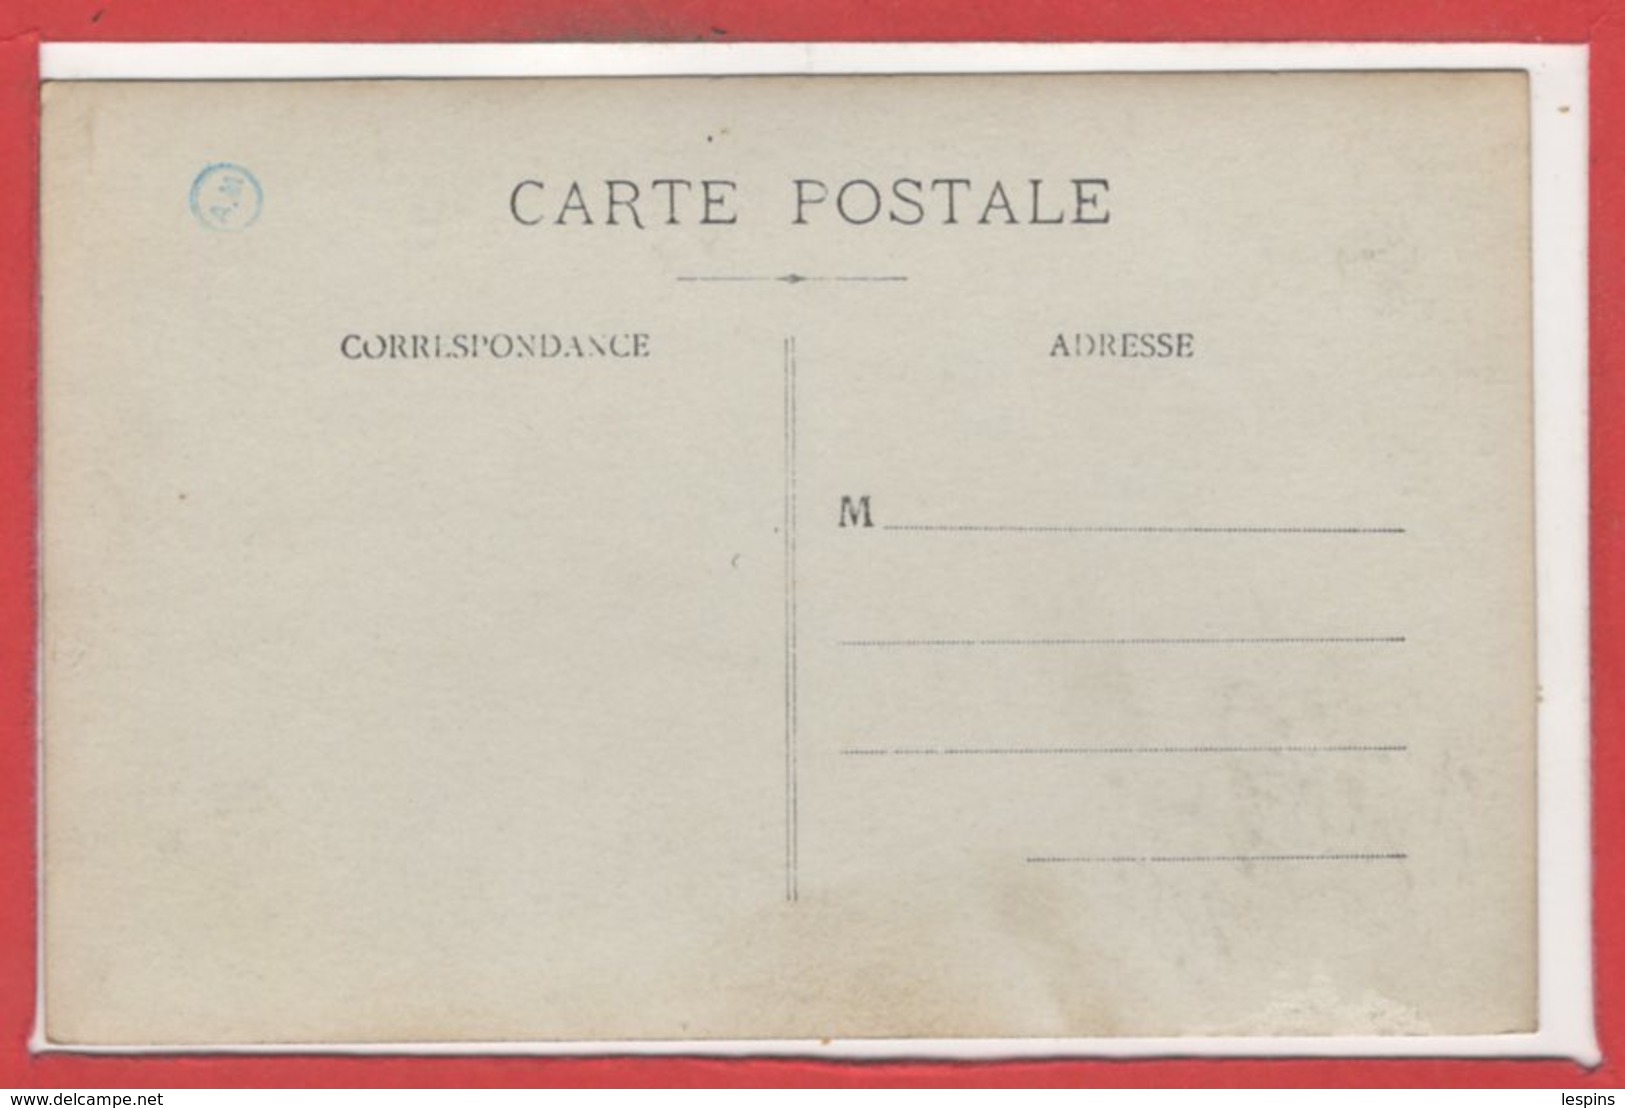 COMMERCE --  CARTE PHOTO - Magasin - Journaux - Papeterie - Magasins